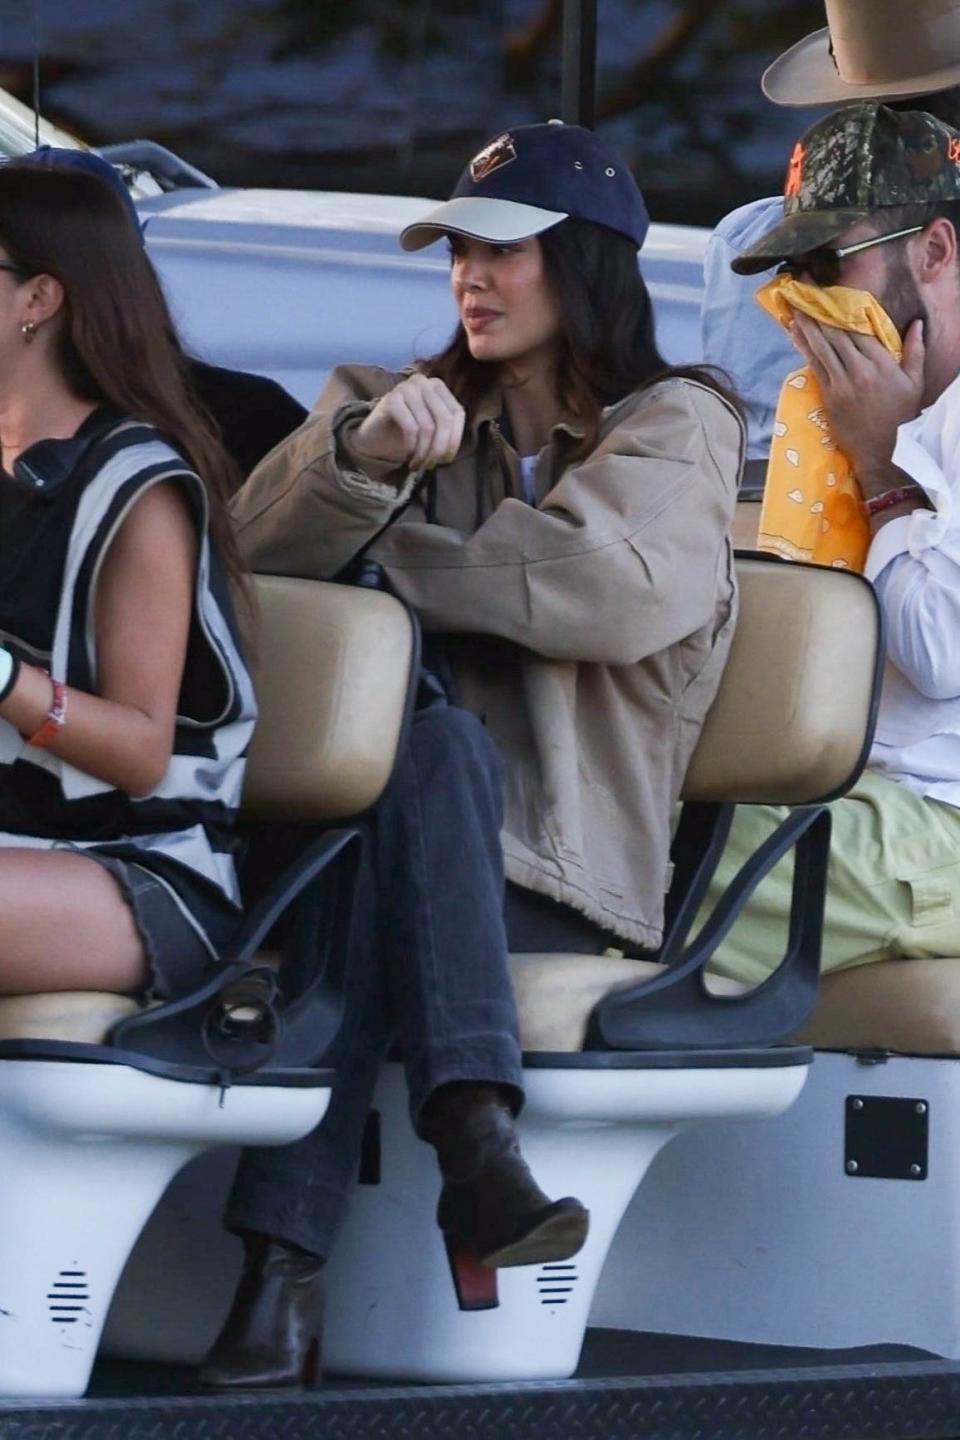 kendall jenner at Stagecoach wearing a carhartt jacket, jeans, and boots